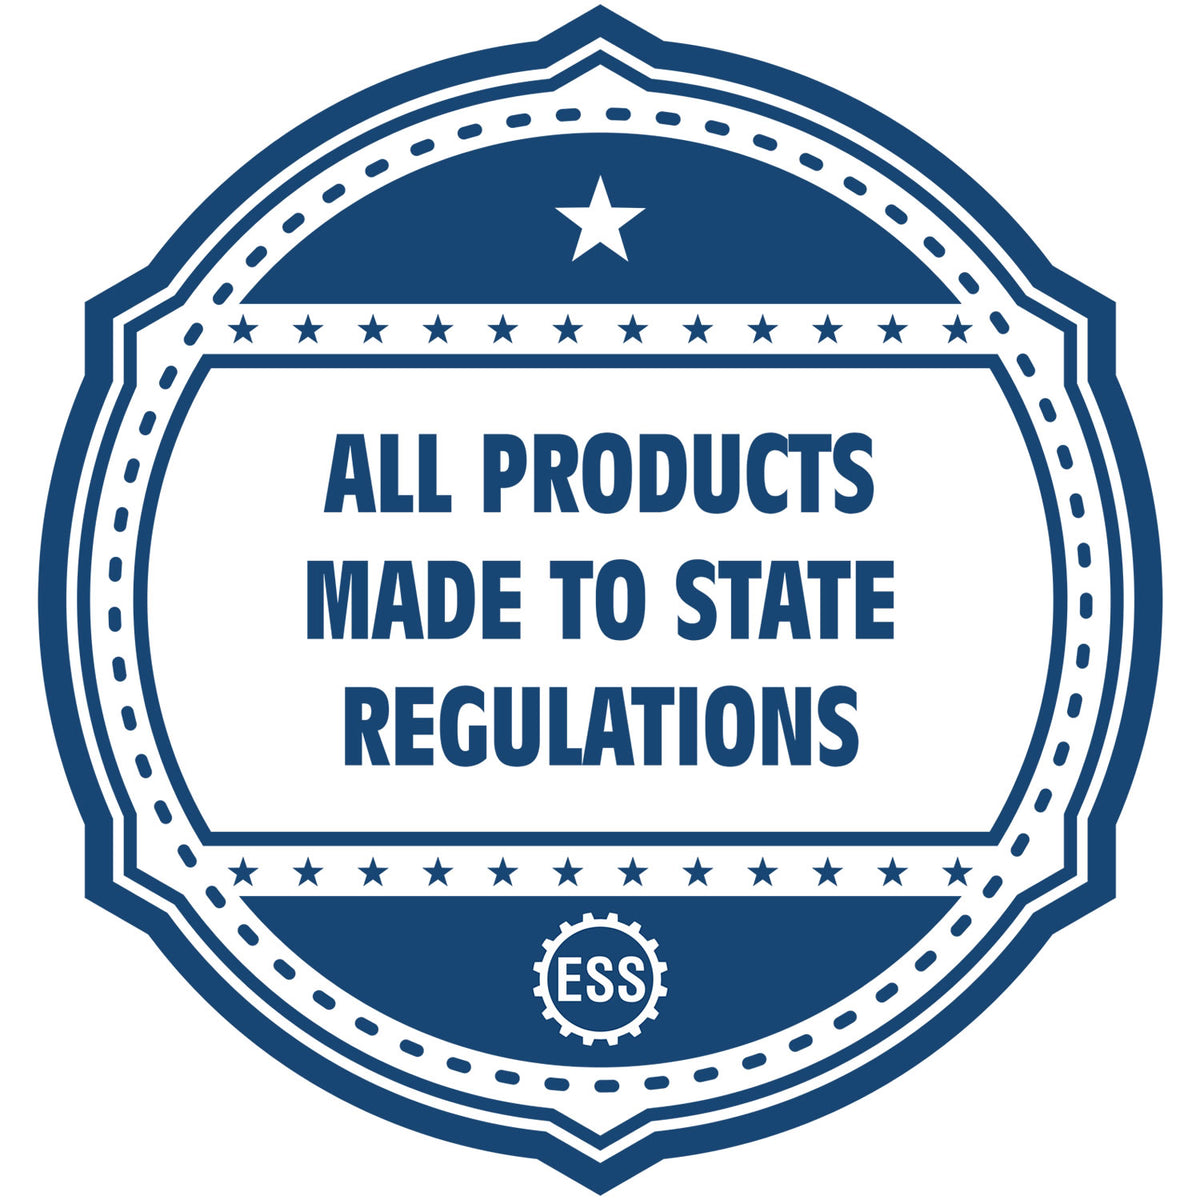 A blue icon or badge for the Slim Pre-Inked Alaska Professional Geologist Seal Stamp showing that this product is made in compliance with state regulations.